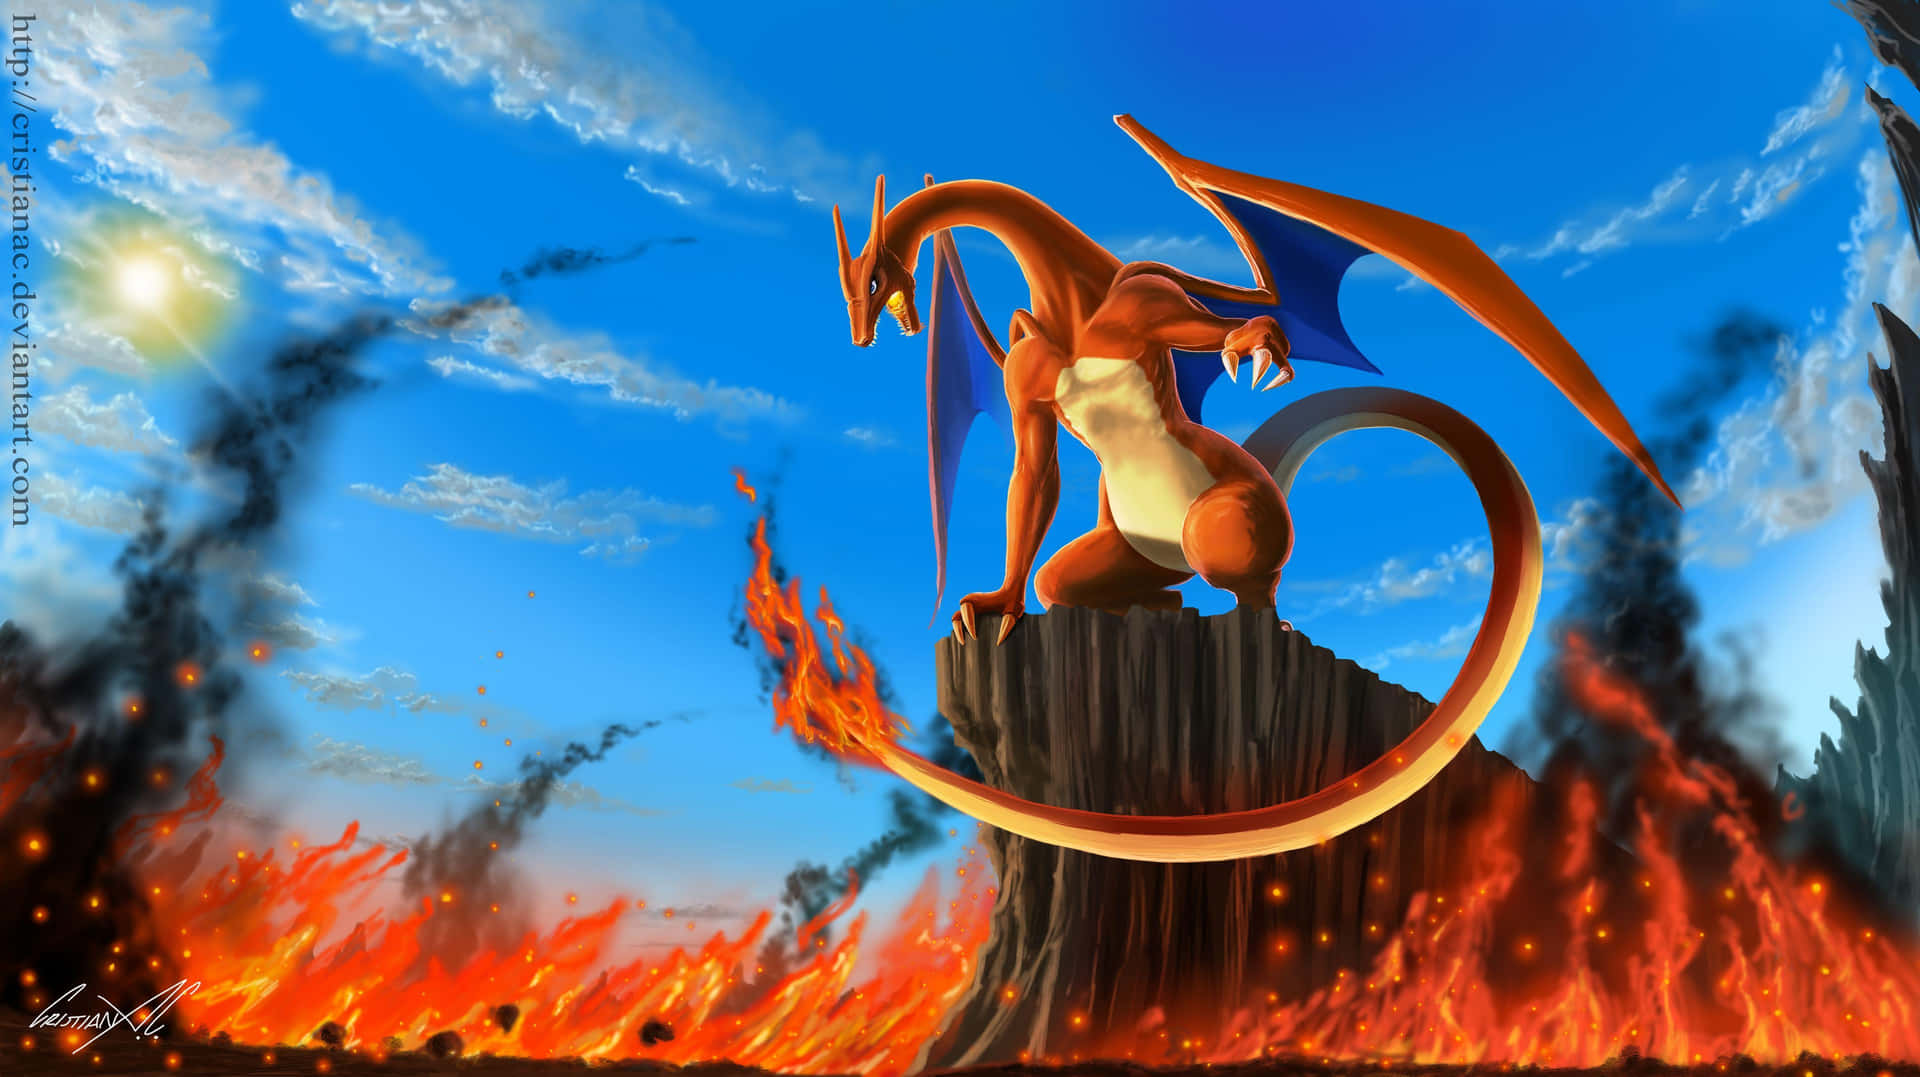 Charizard is one of the most iconic Pokémon Wallpaper